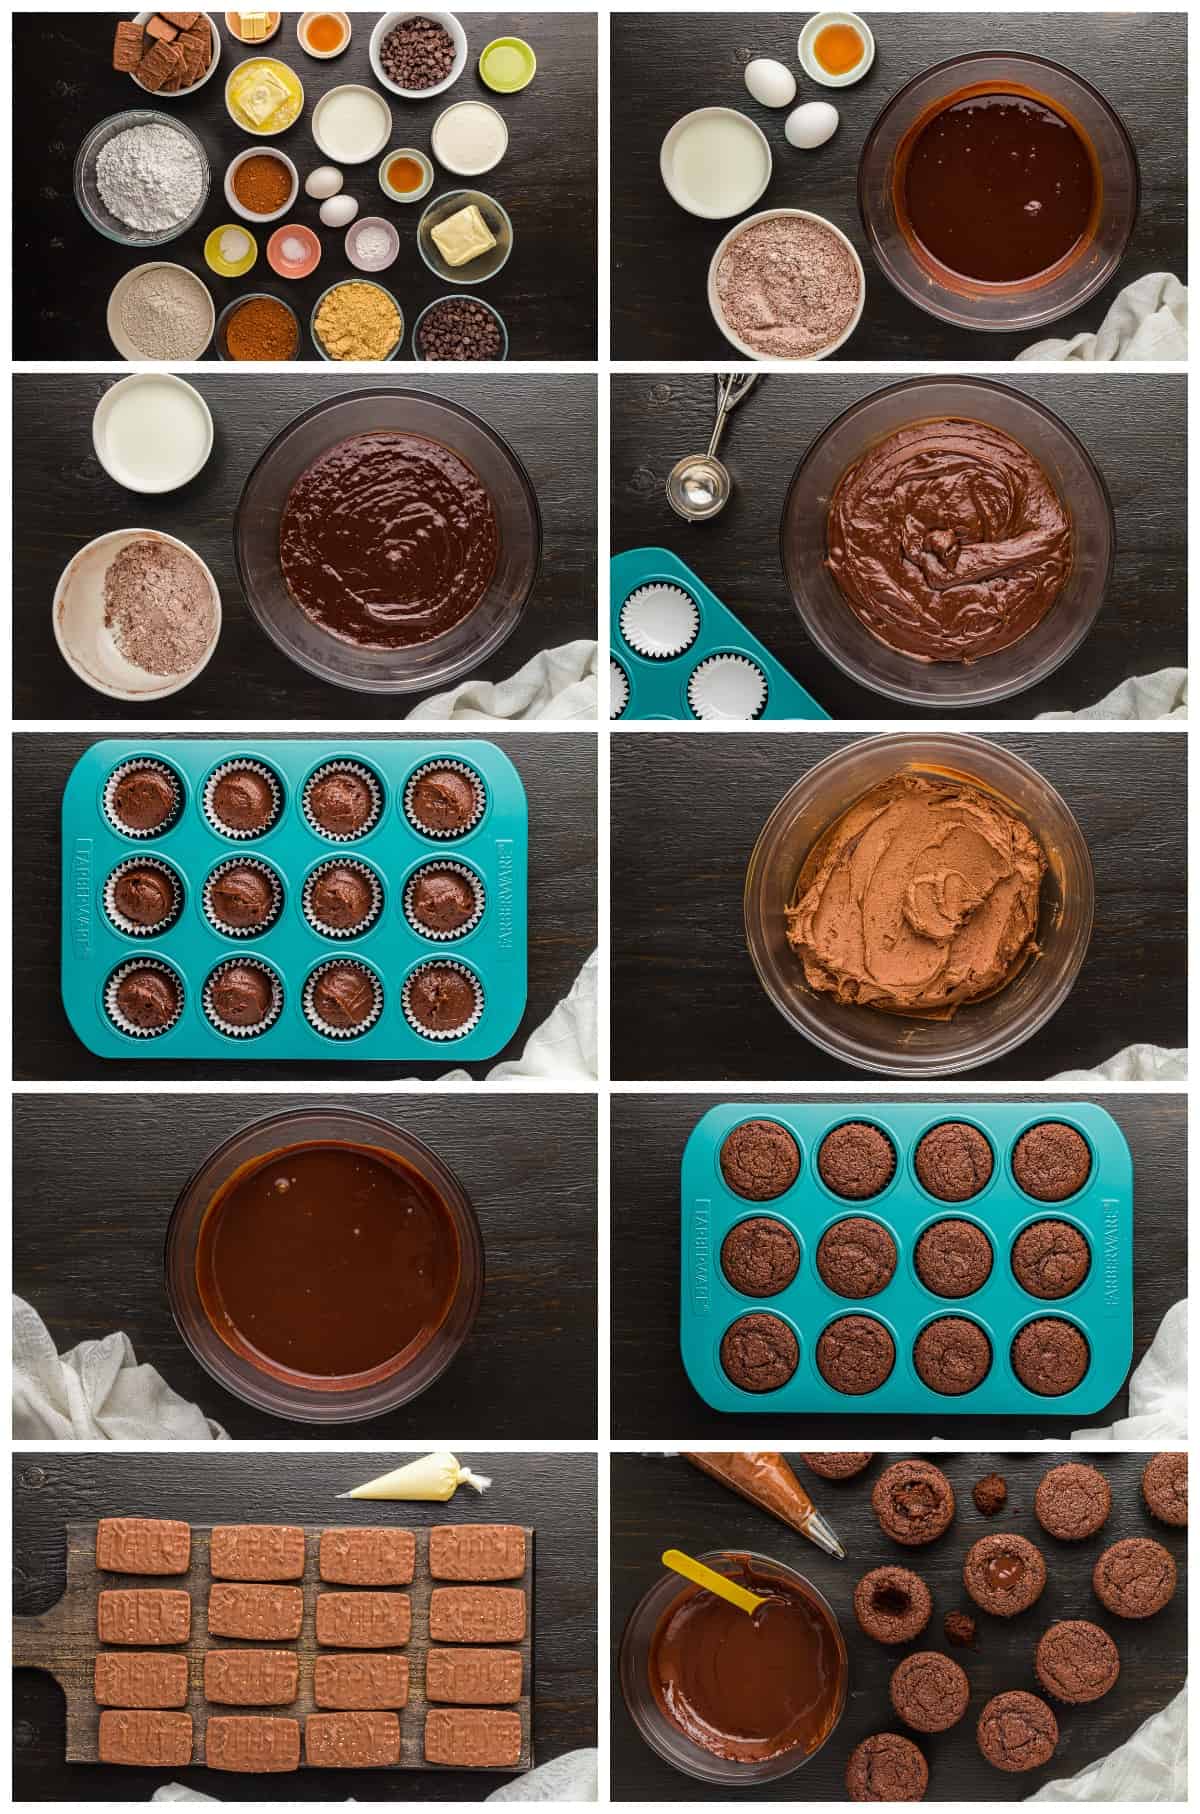 how to make death by chocolate graveyard cupcakes step by step photo instructions